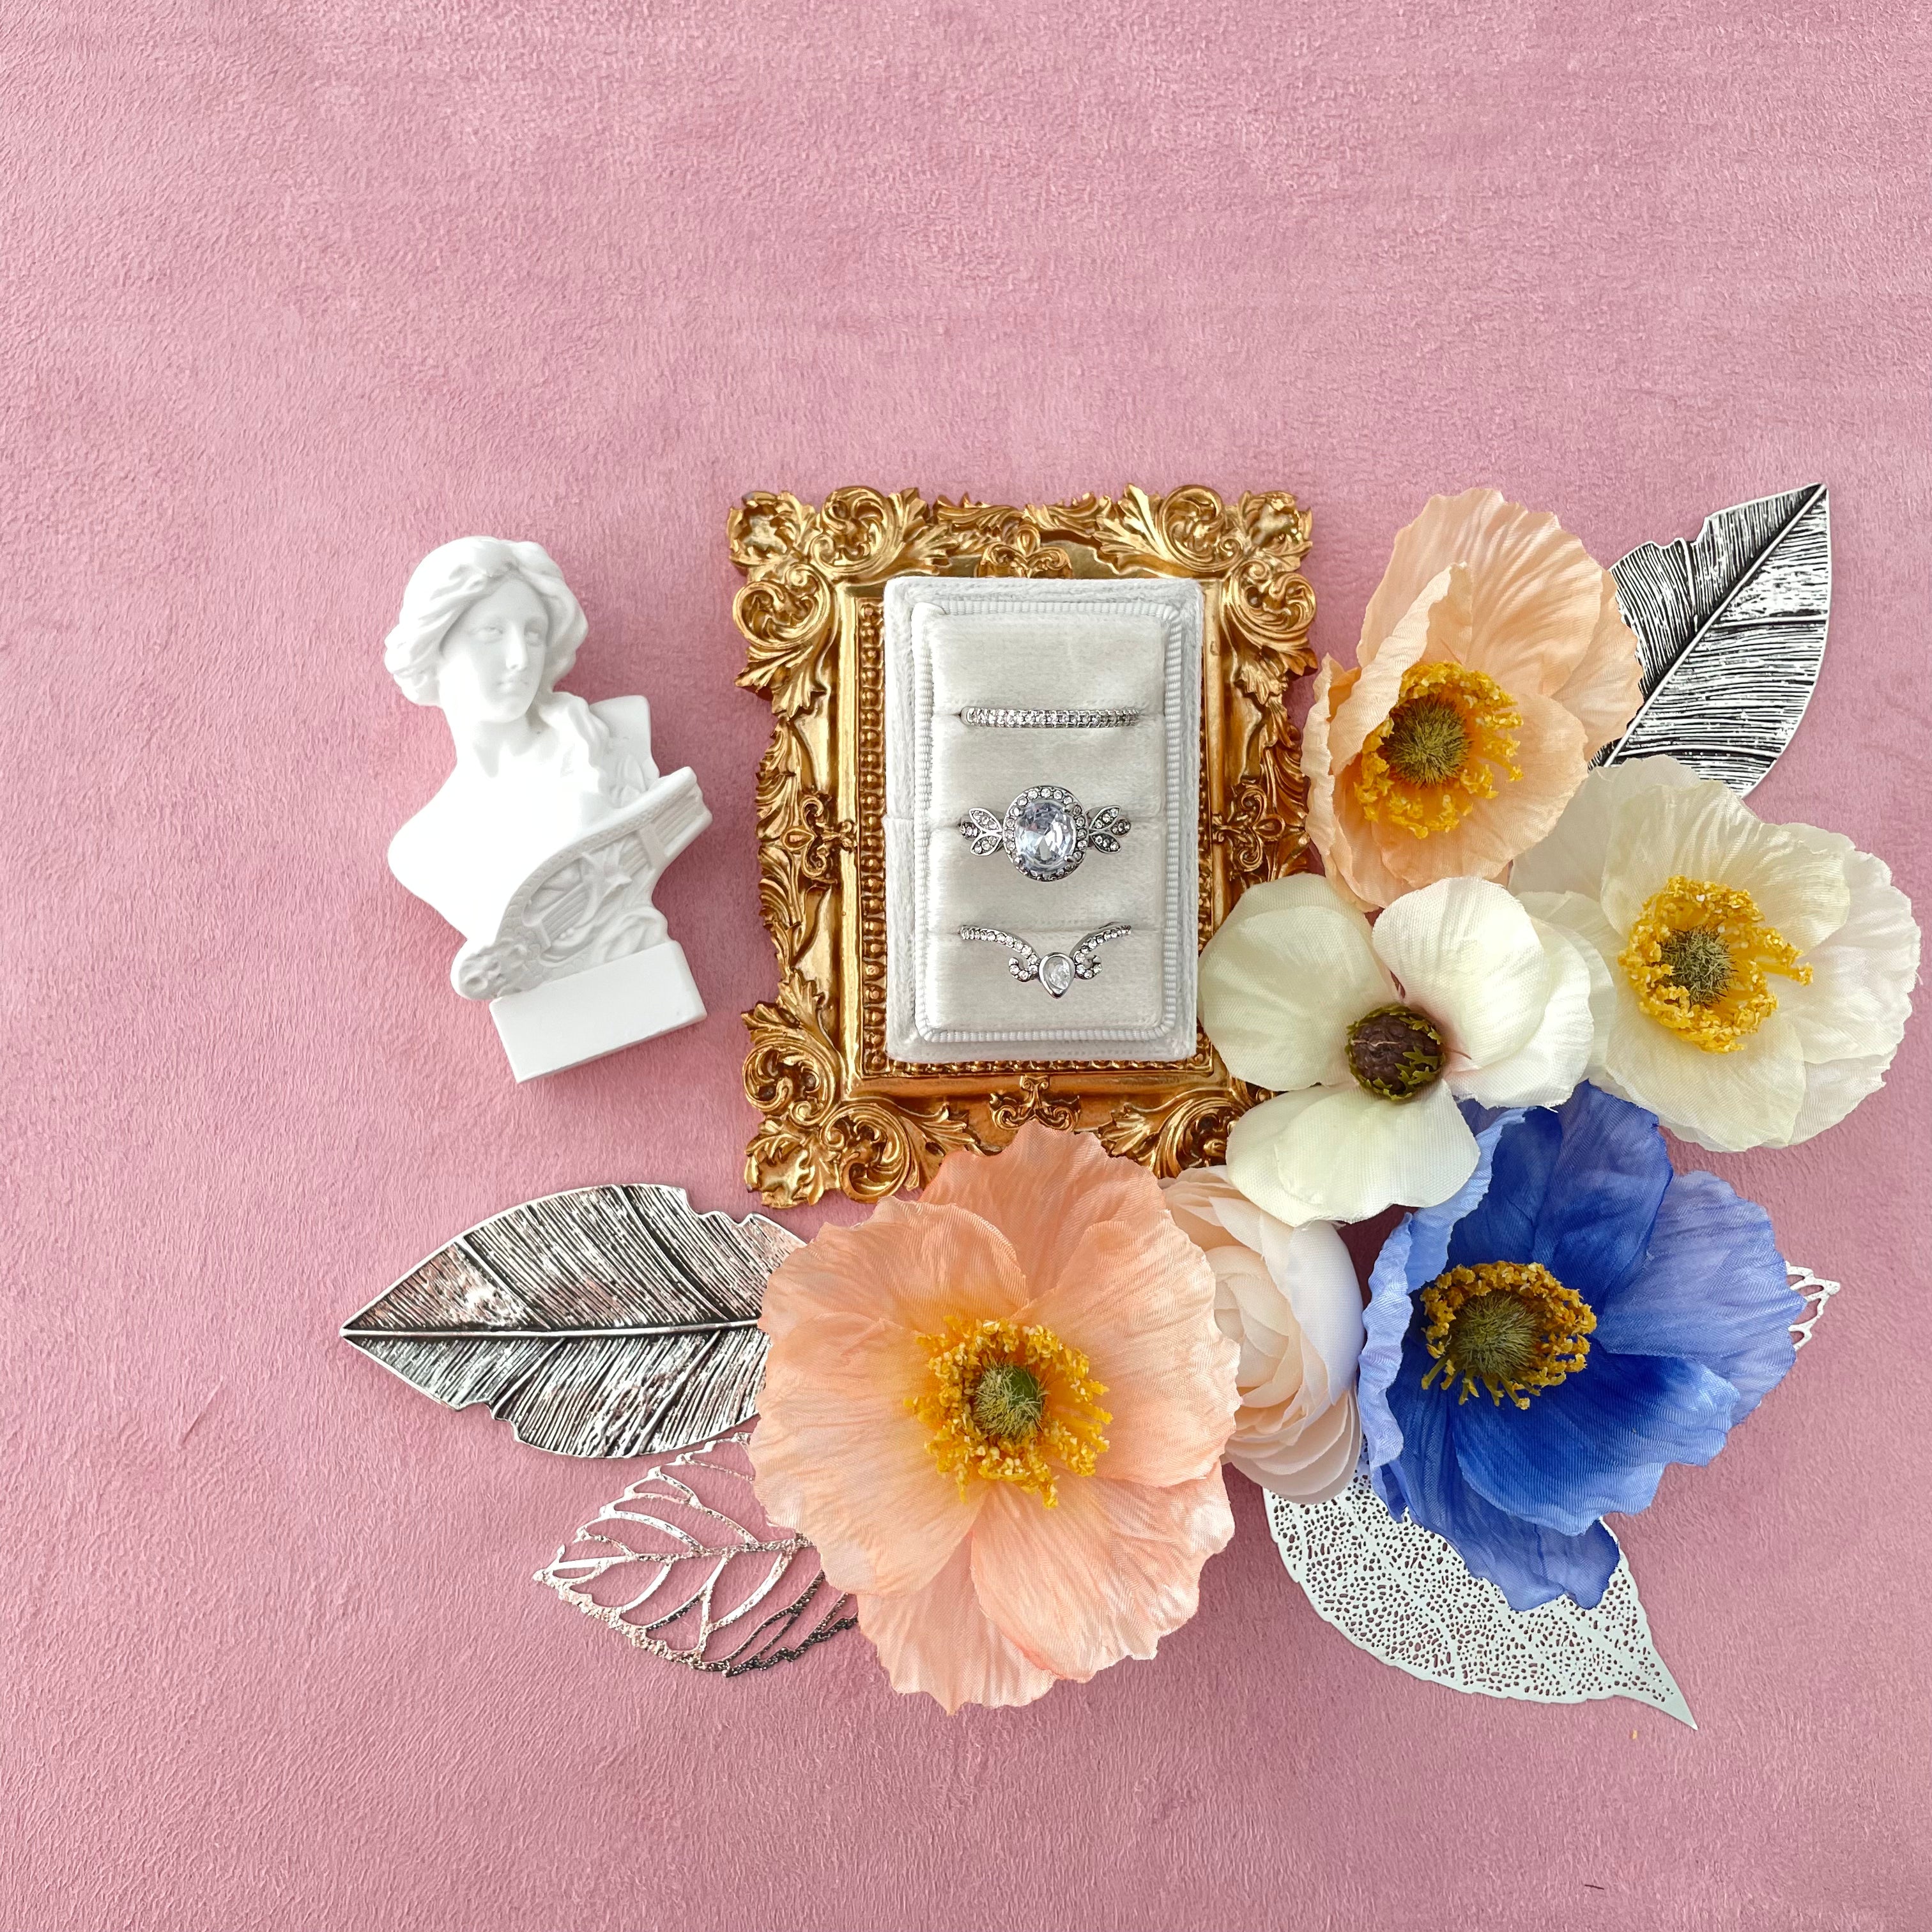 Small vintage figurine and 3 slot ring box on gold tray with 4 styling leaves and pink, white and blue florals - wedding flat lay props from Champagne & GRIT